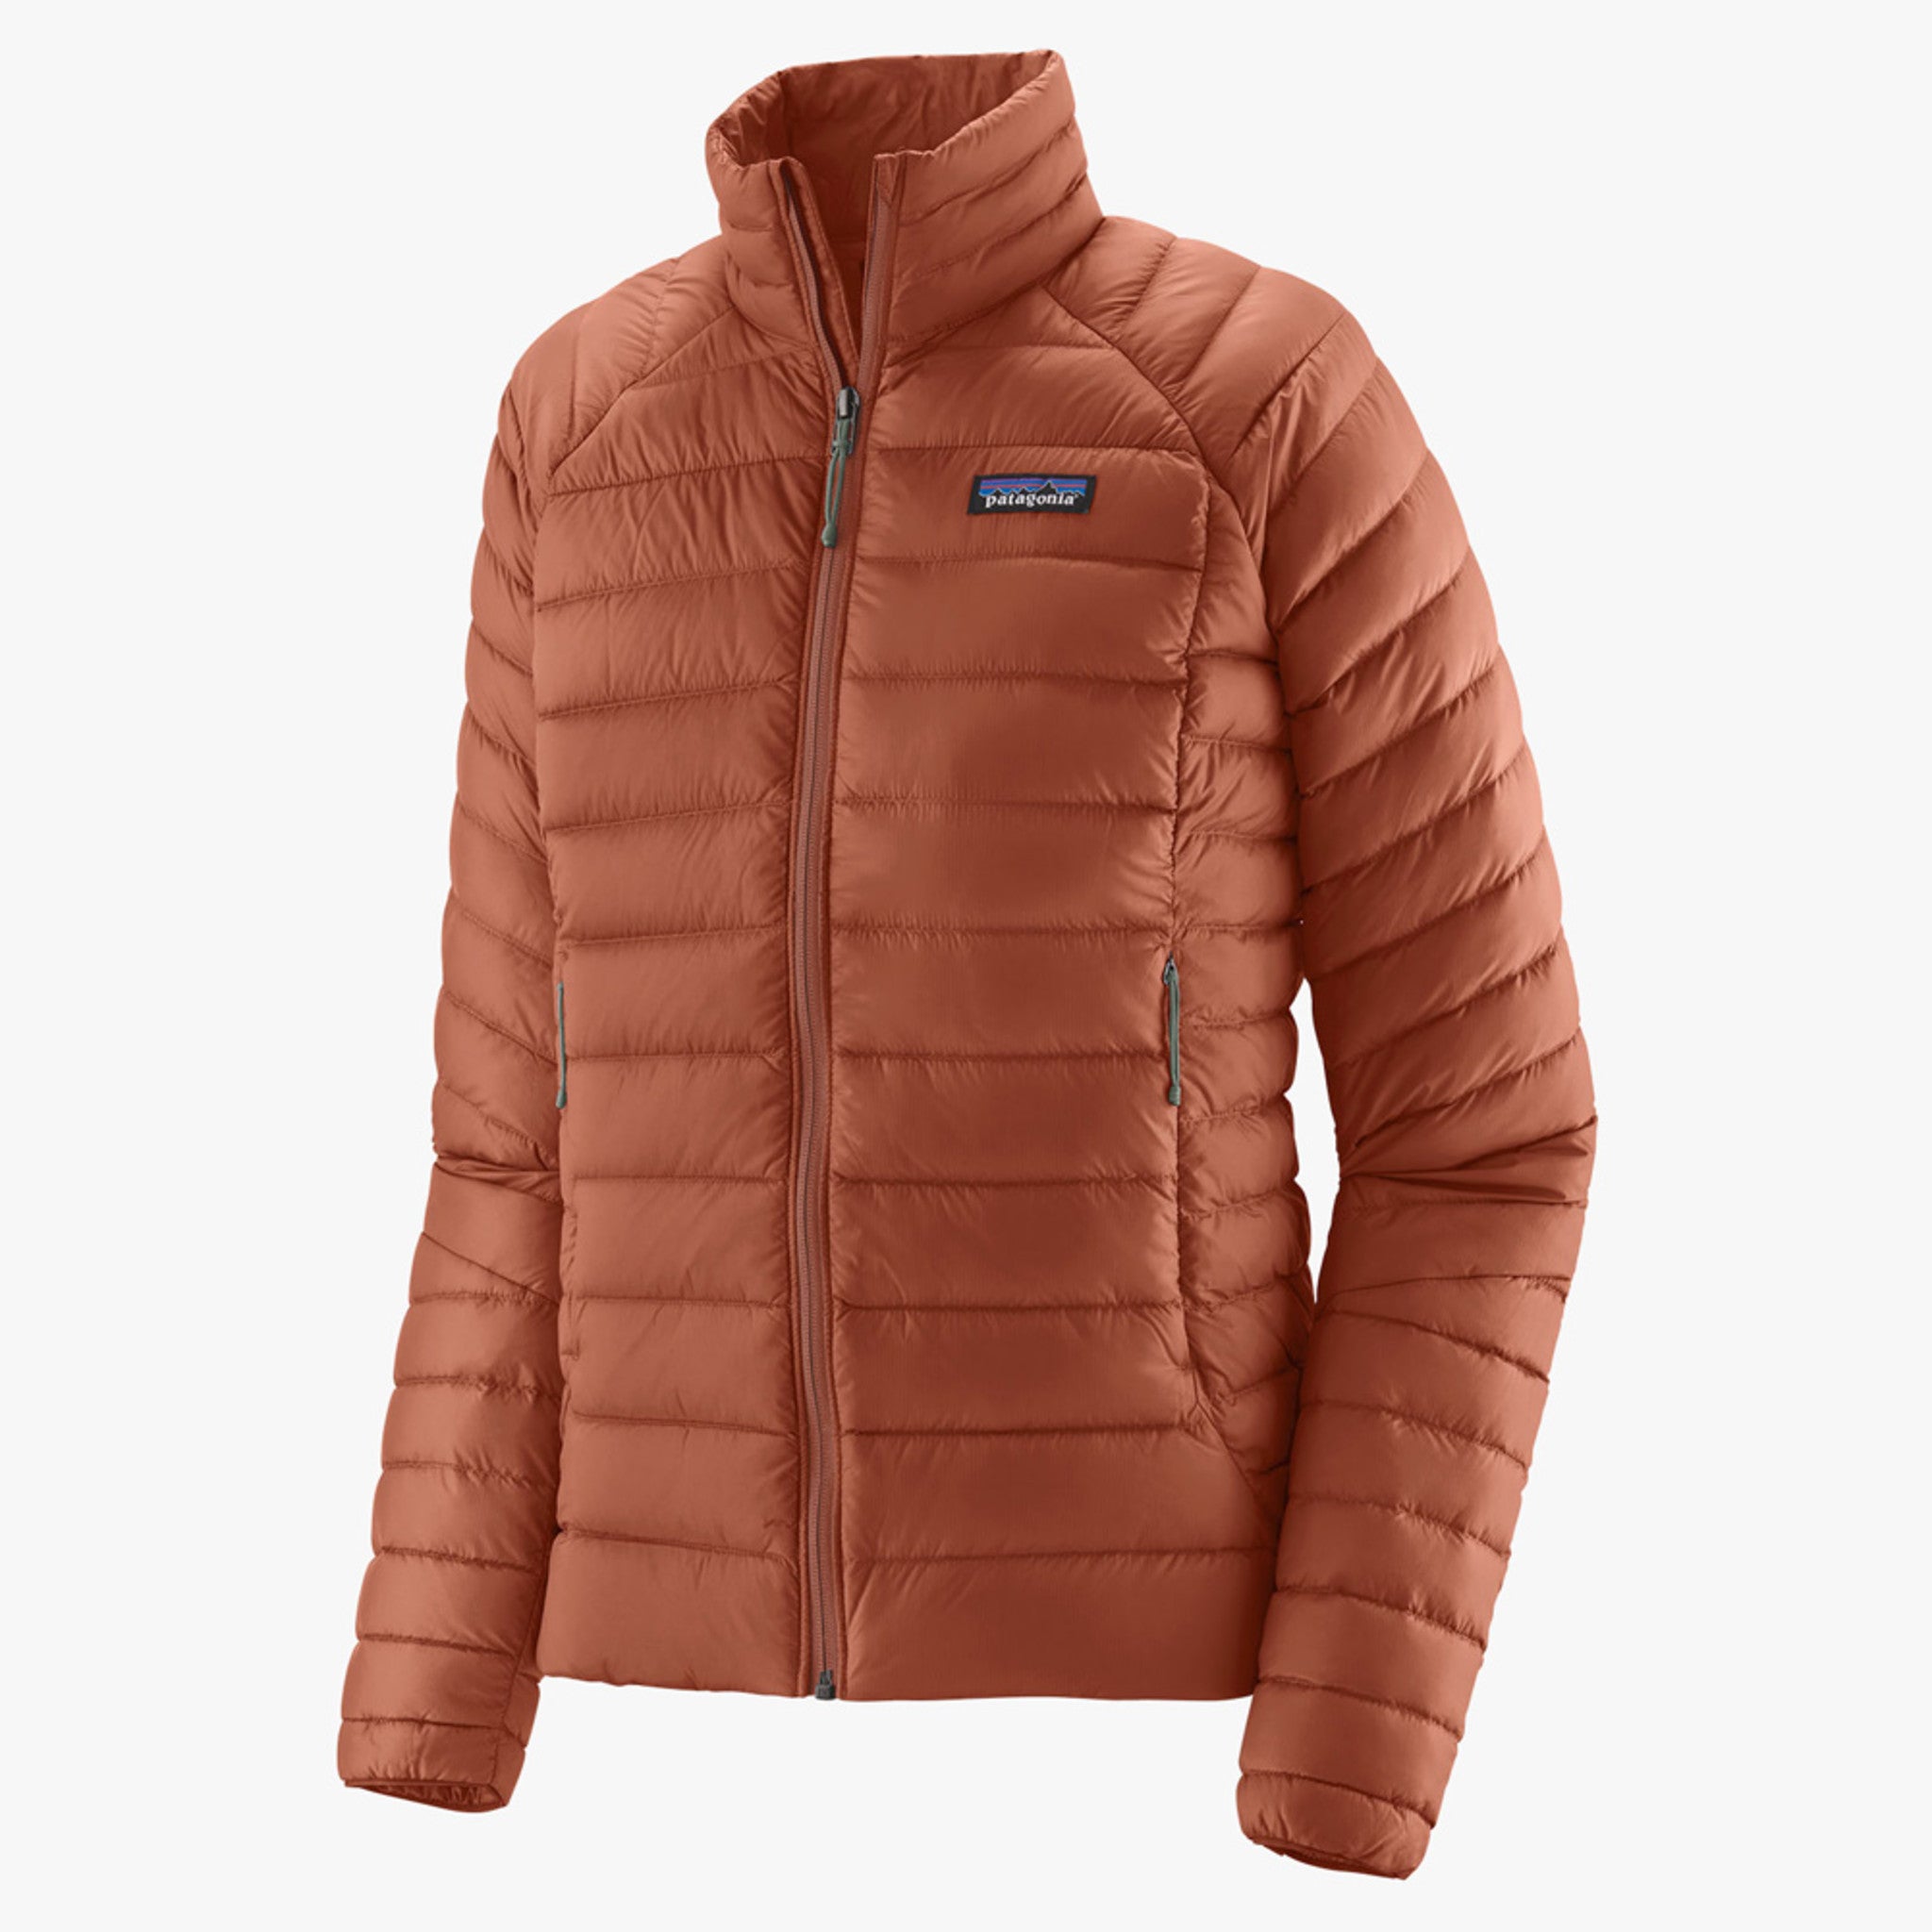 The 9 Best Patagonia Jackets, Coats, & Sweaters (2022 Guide)